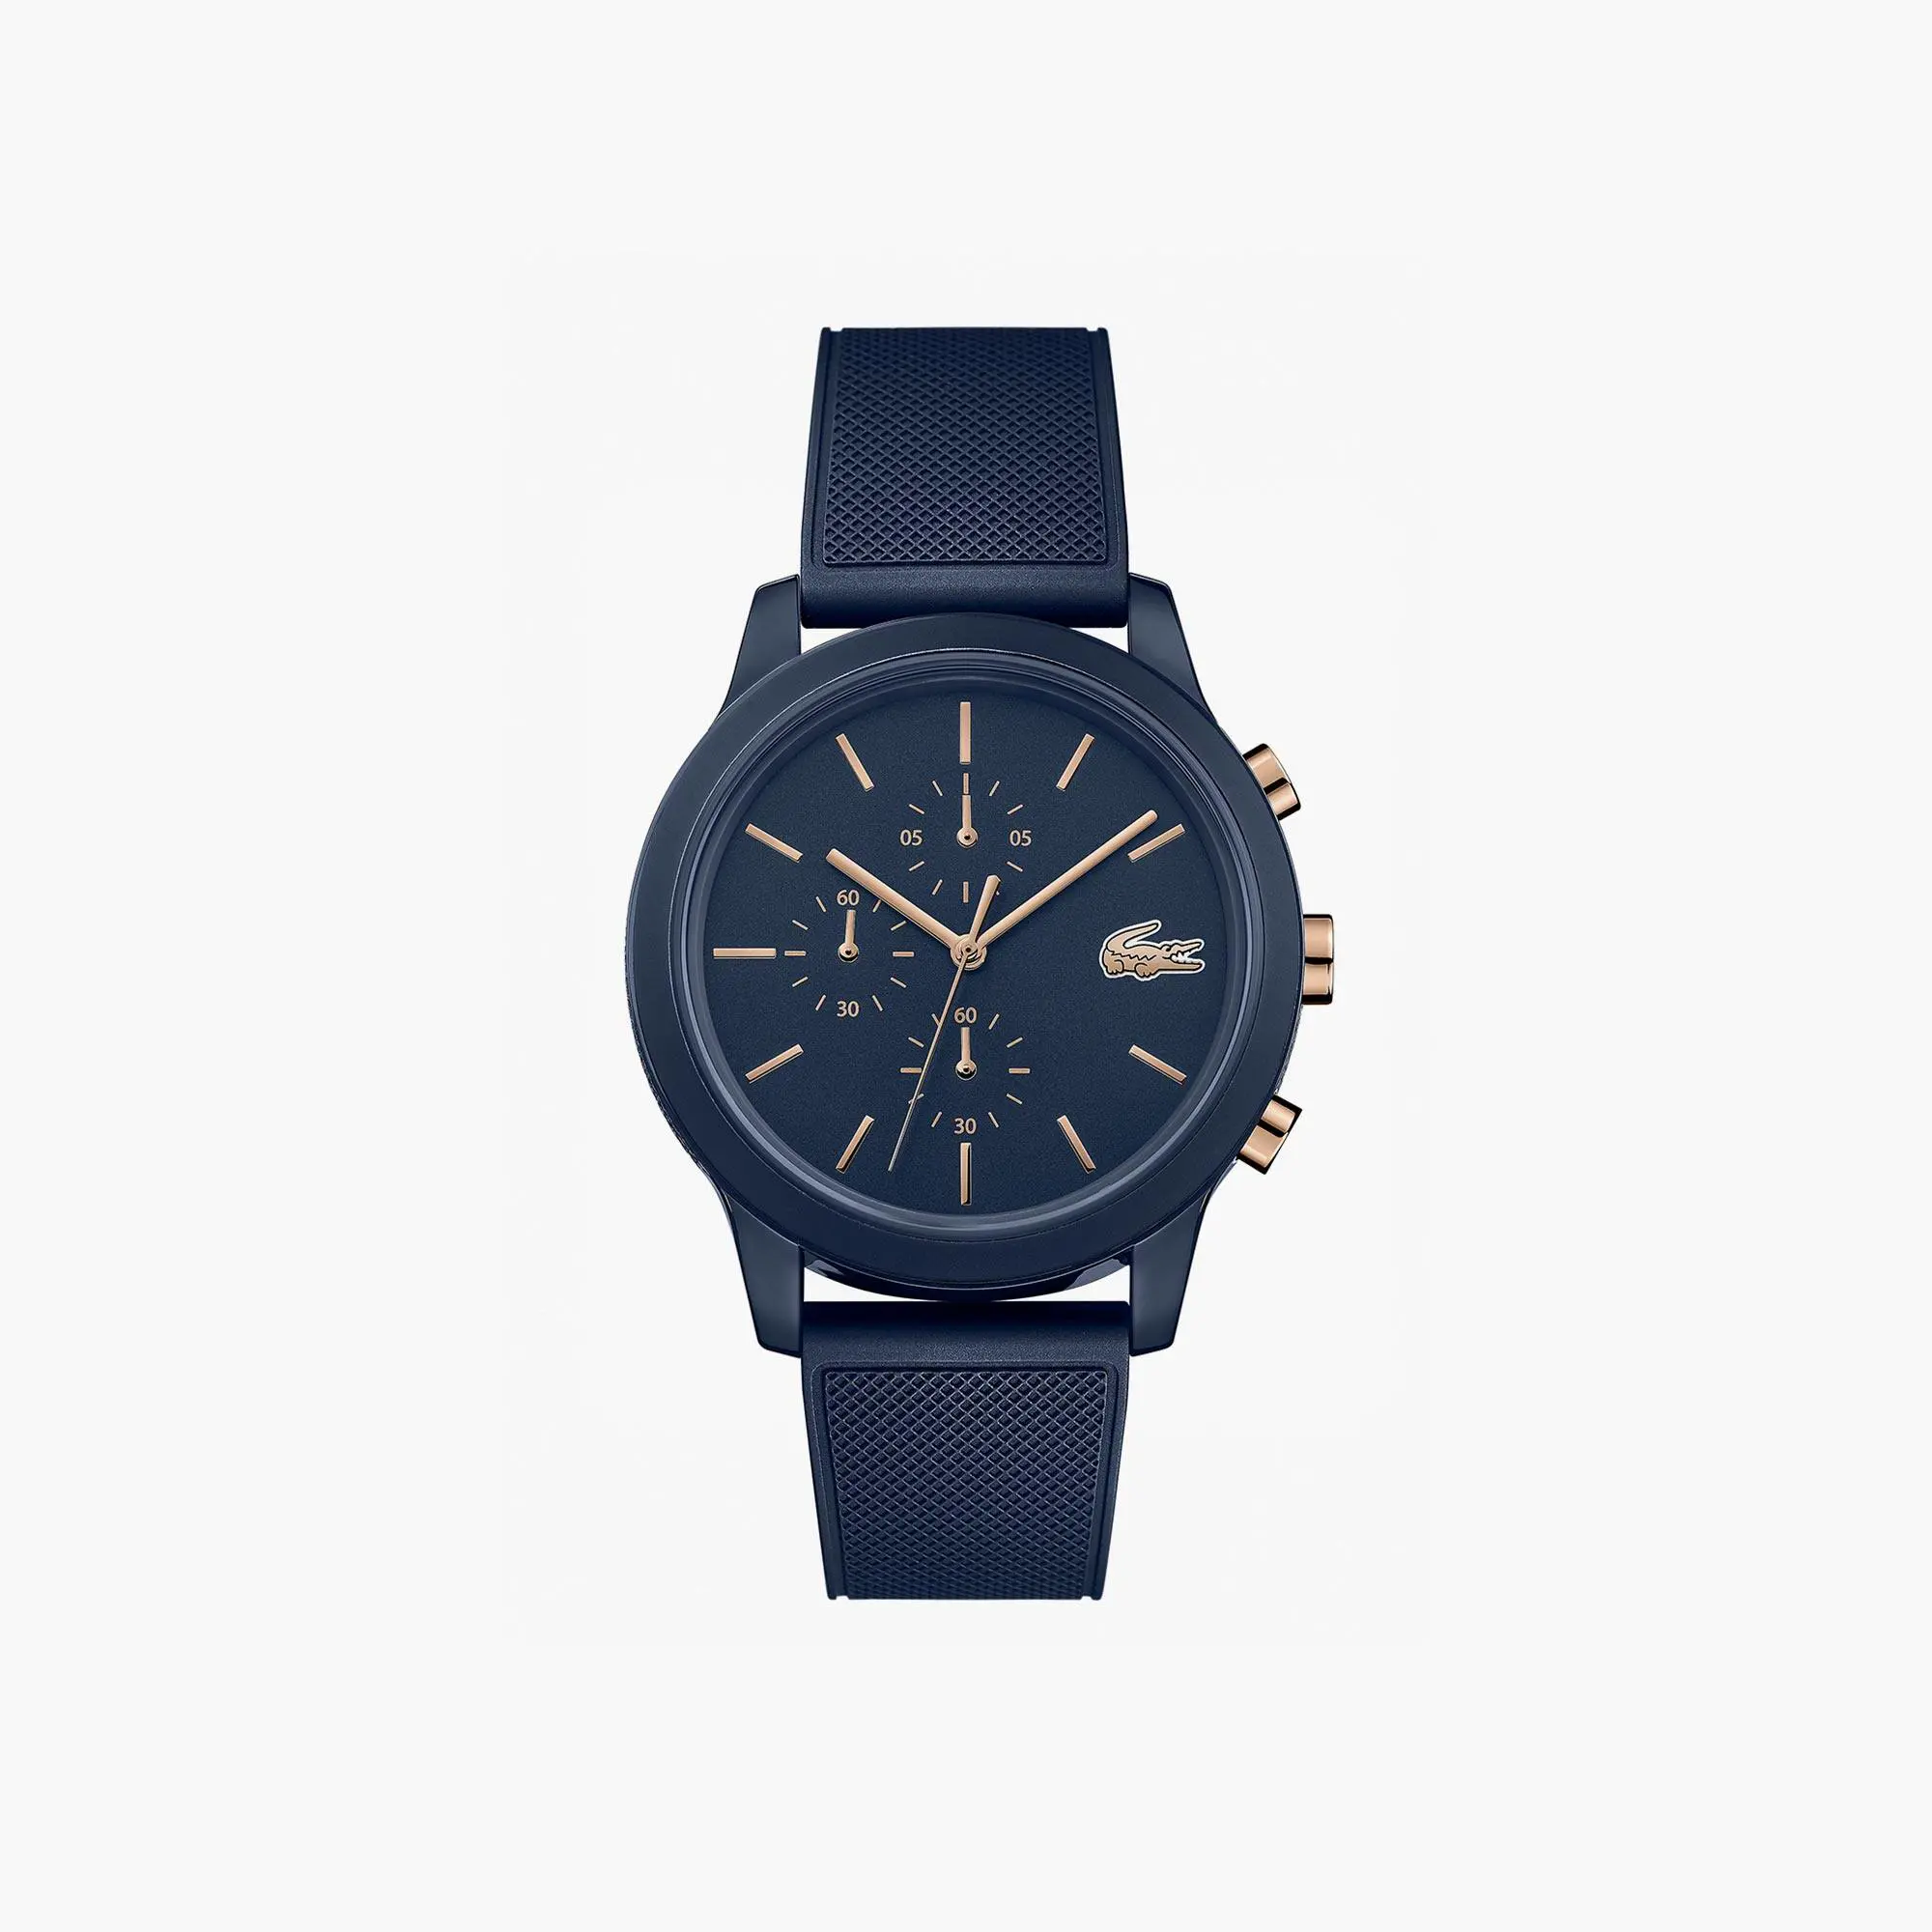 Lacoste Gents Lacoste.12.12 Watch With Navy Silicone Petit Piqué Strap. 1